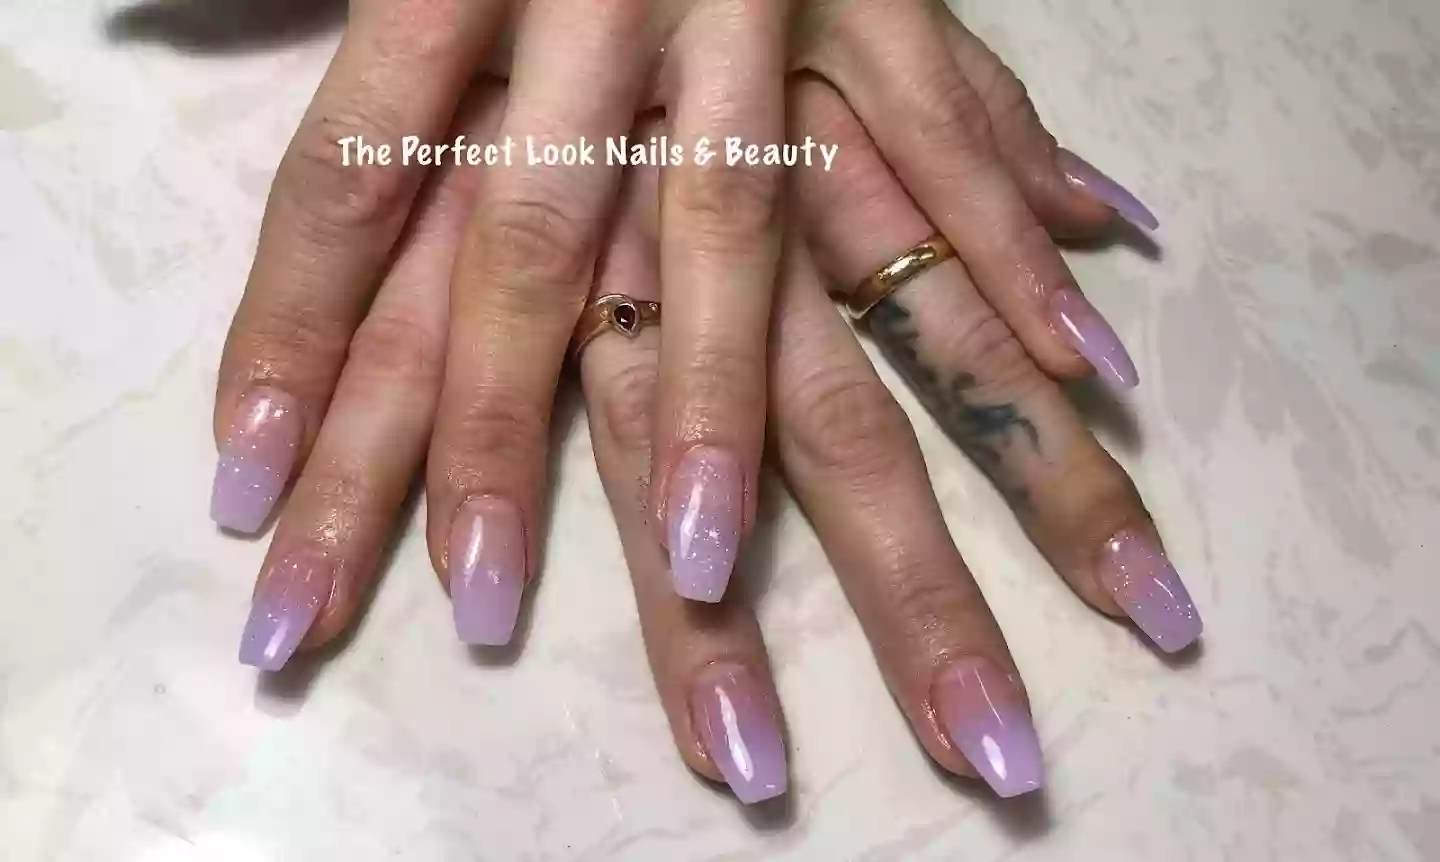 The Perfect Look Nails & Beauty